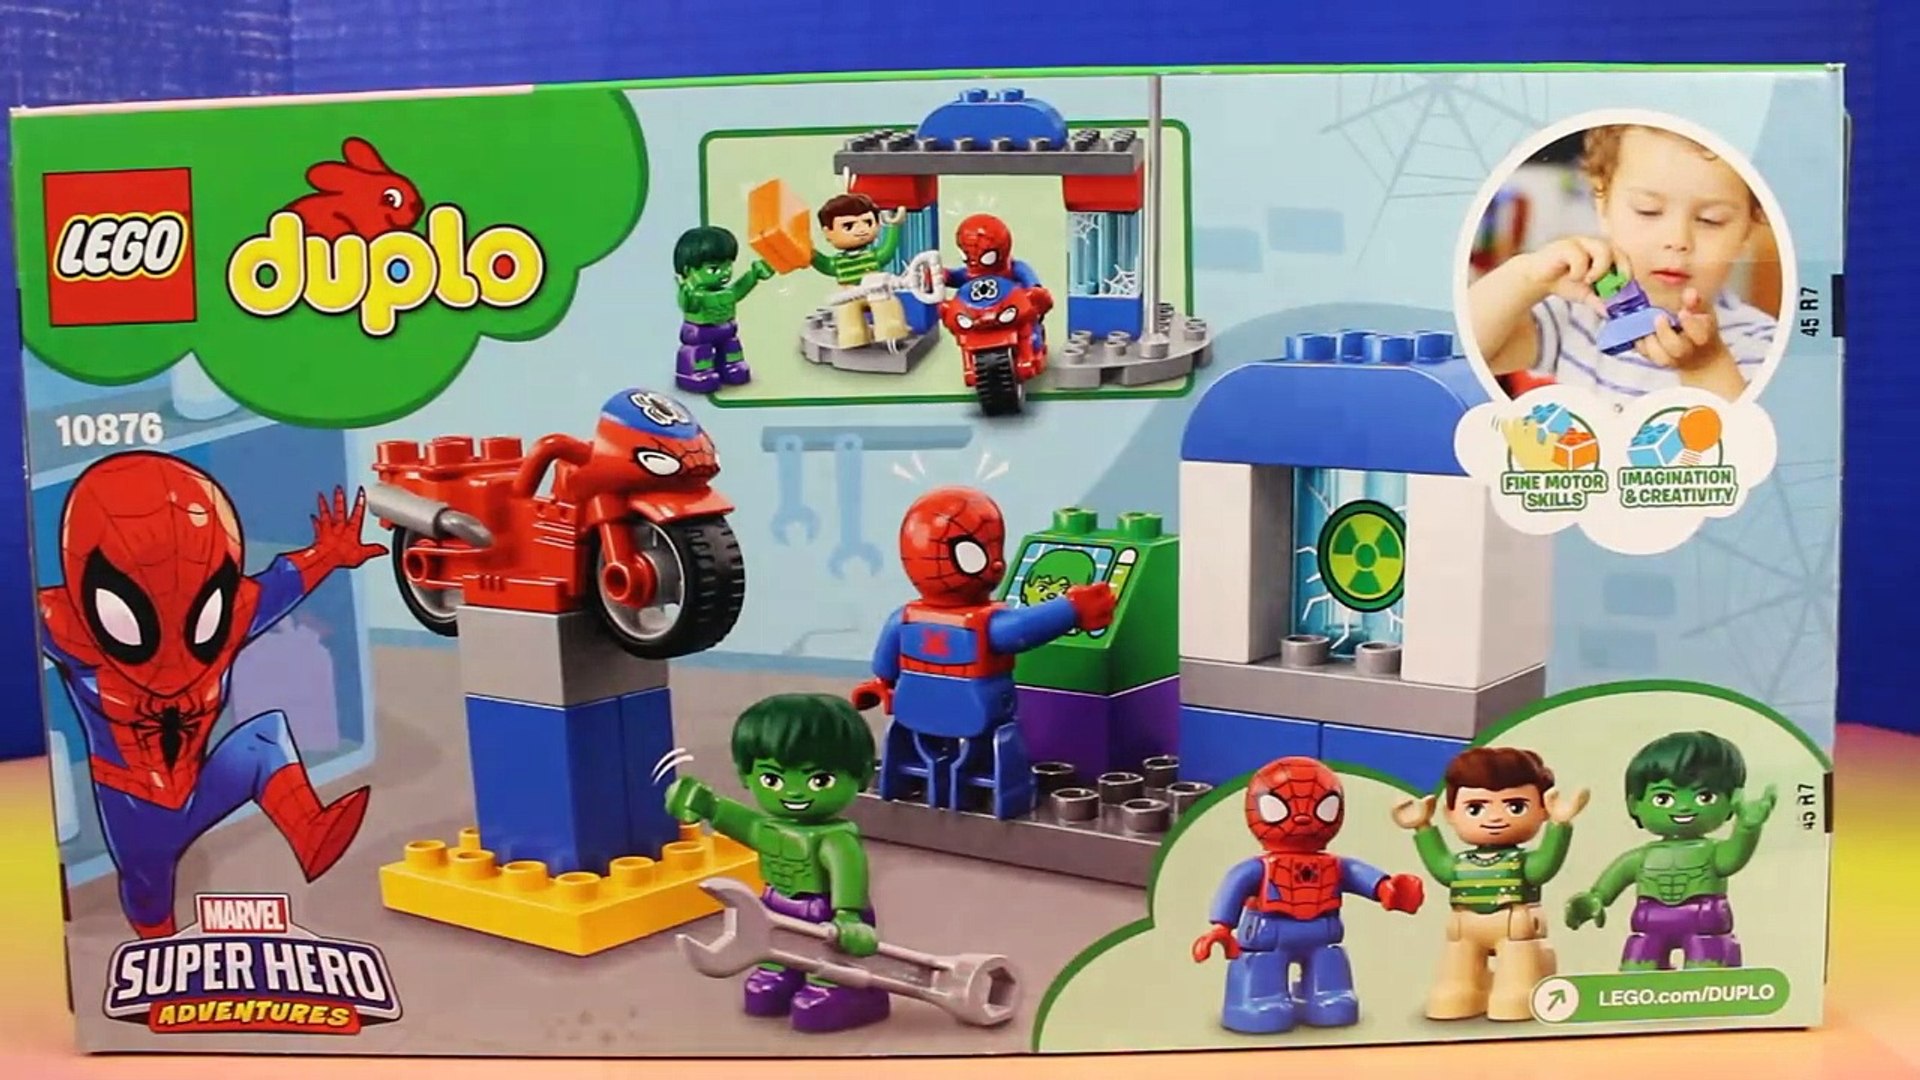 Lego Duplo Spider-man & Hulk Adventures Toy Review With Just4fun290